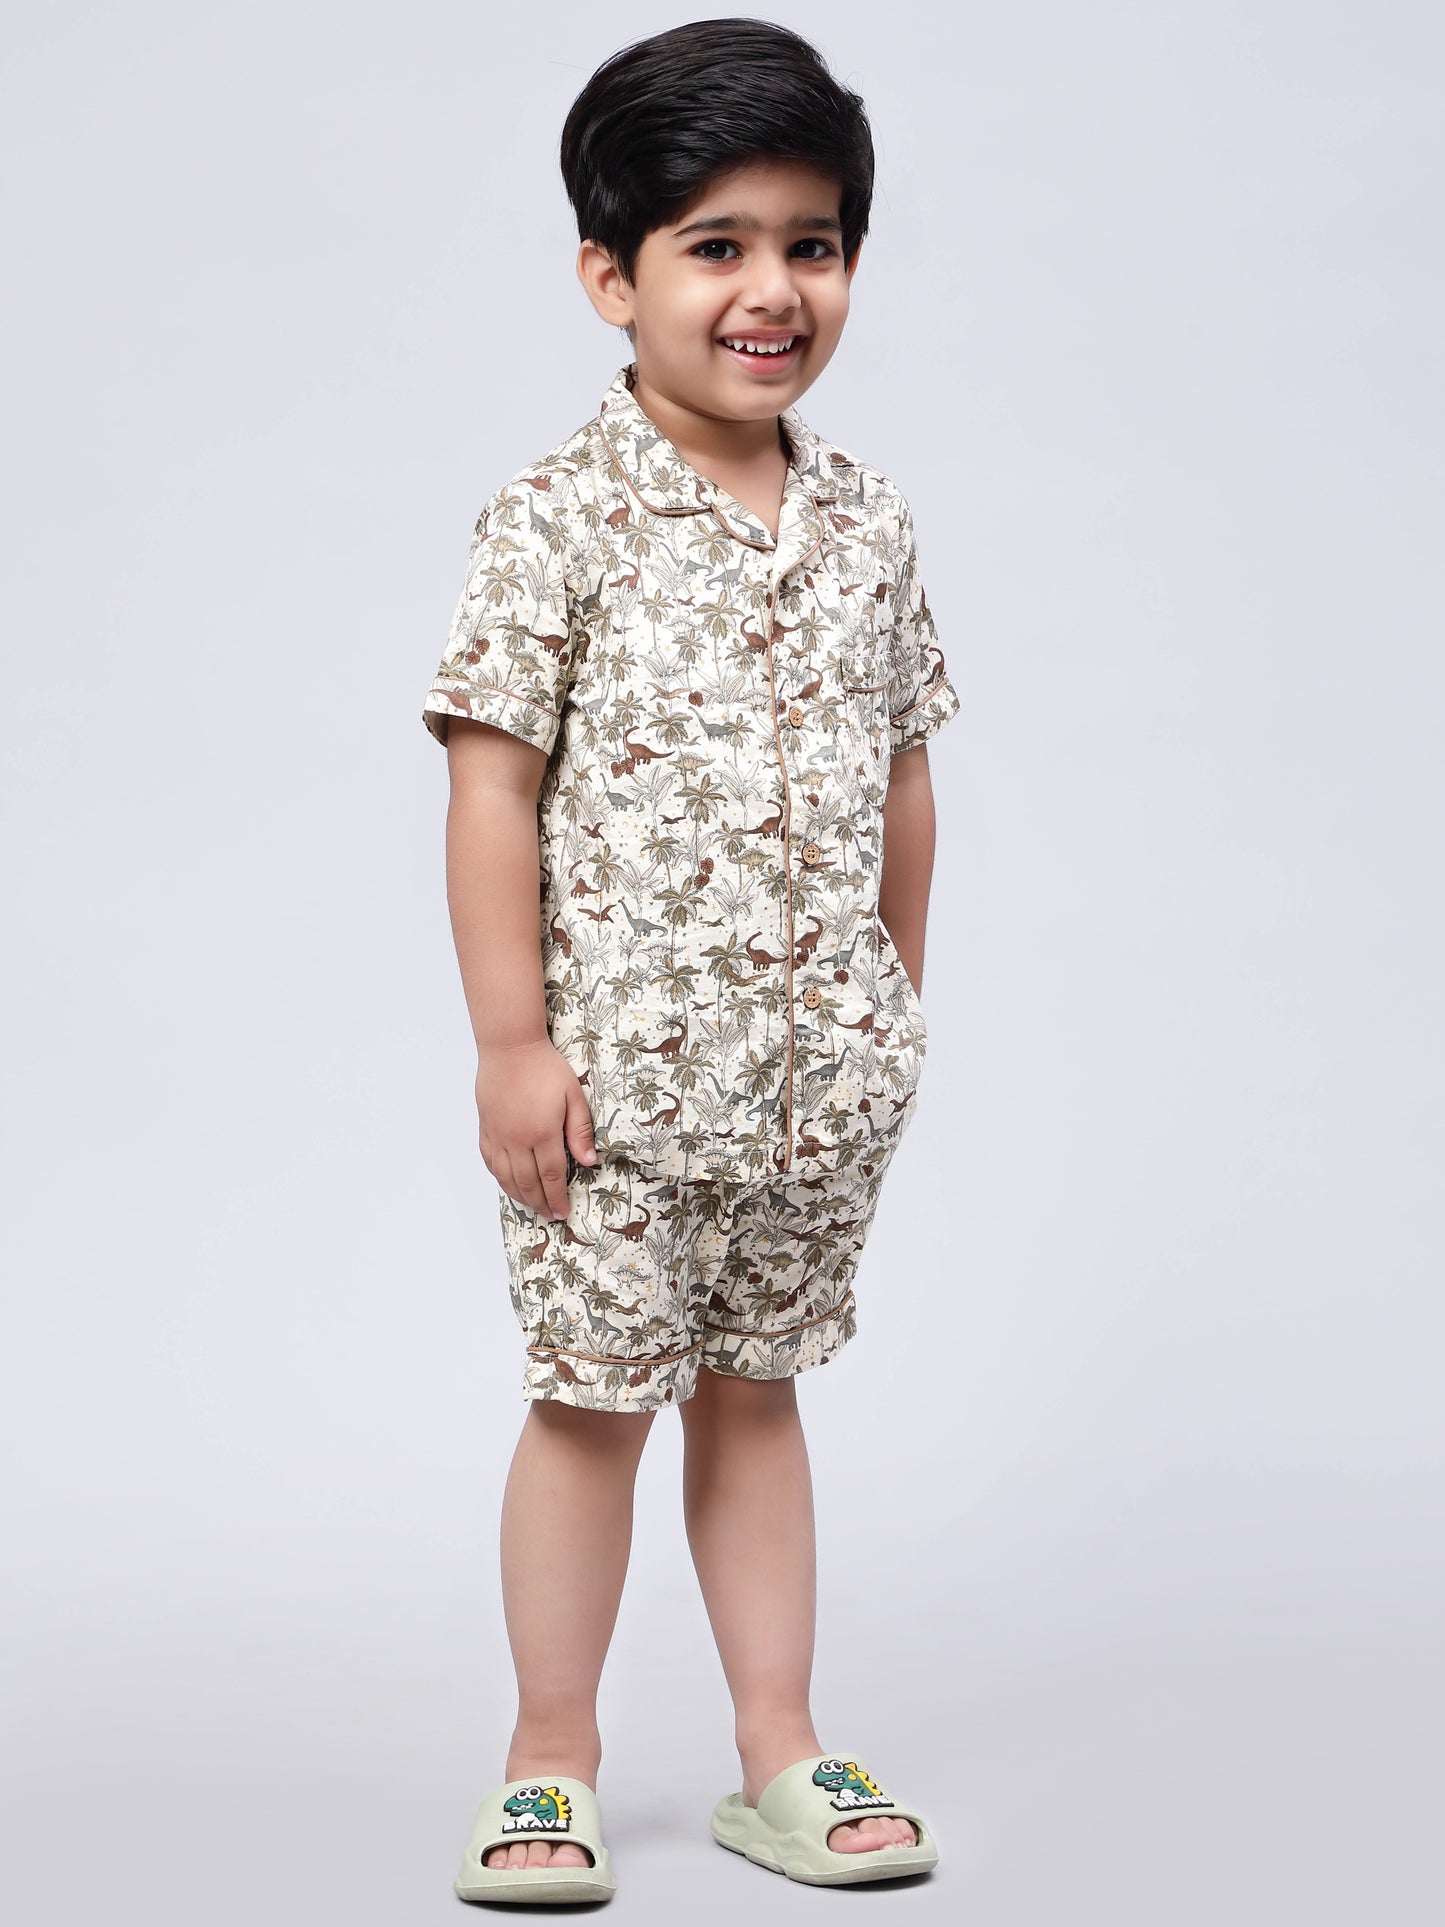 Unisex Dino Print Night suit for Girls or Boys